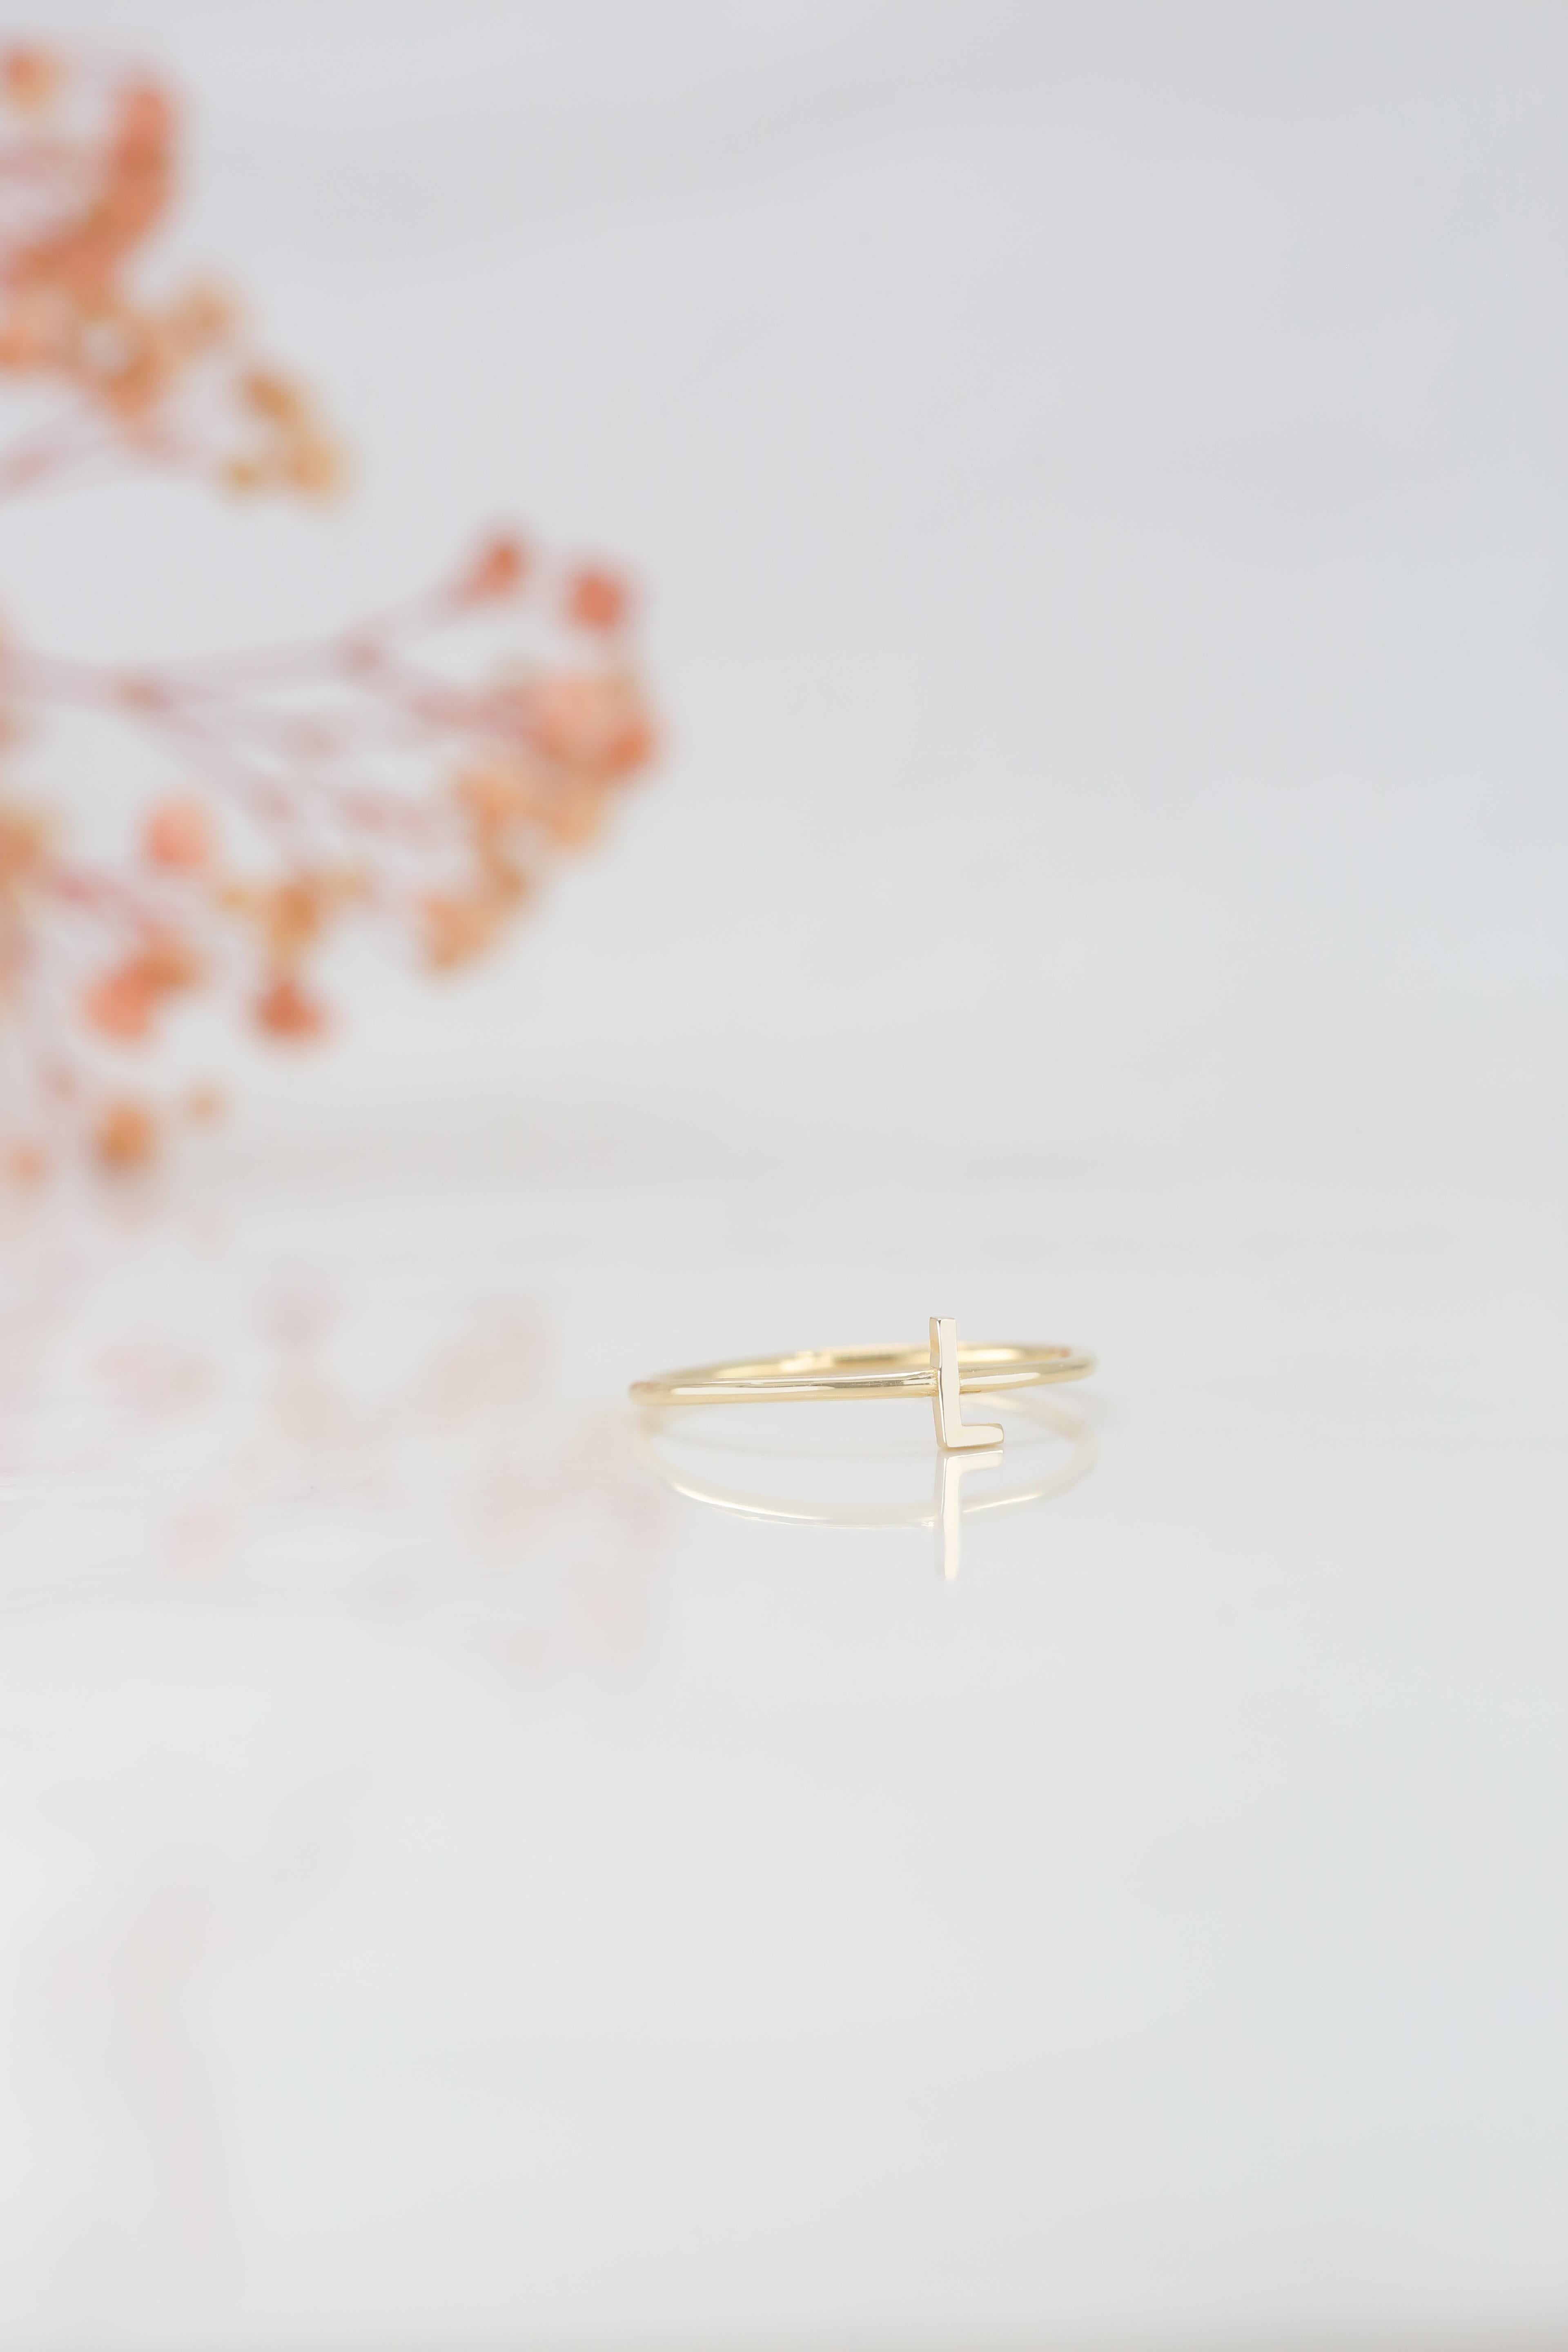 For Sale:  14K Gold Initial L Letter Ring, Personalized Initial Letter Ring 7